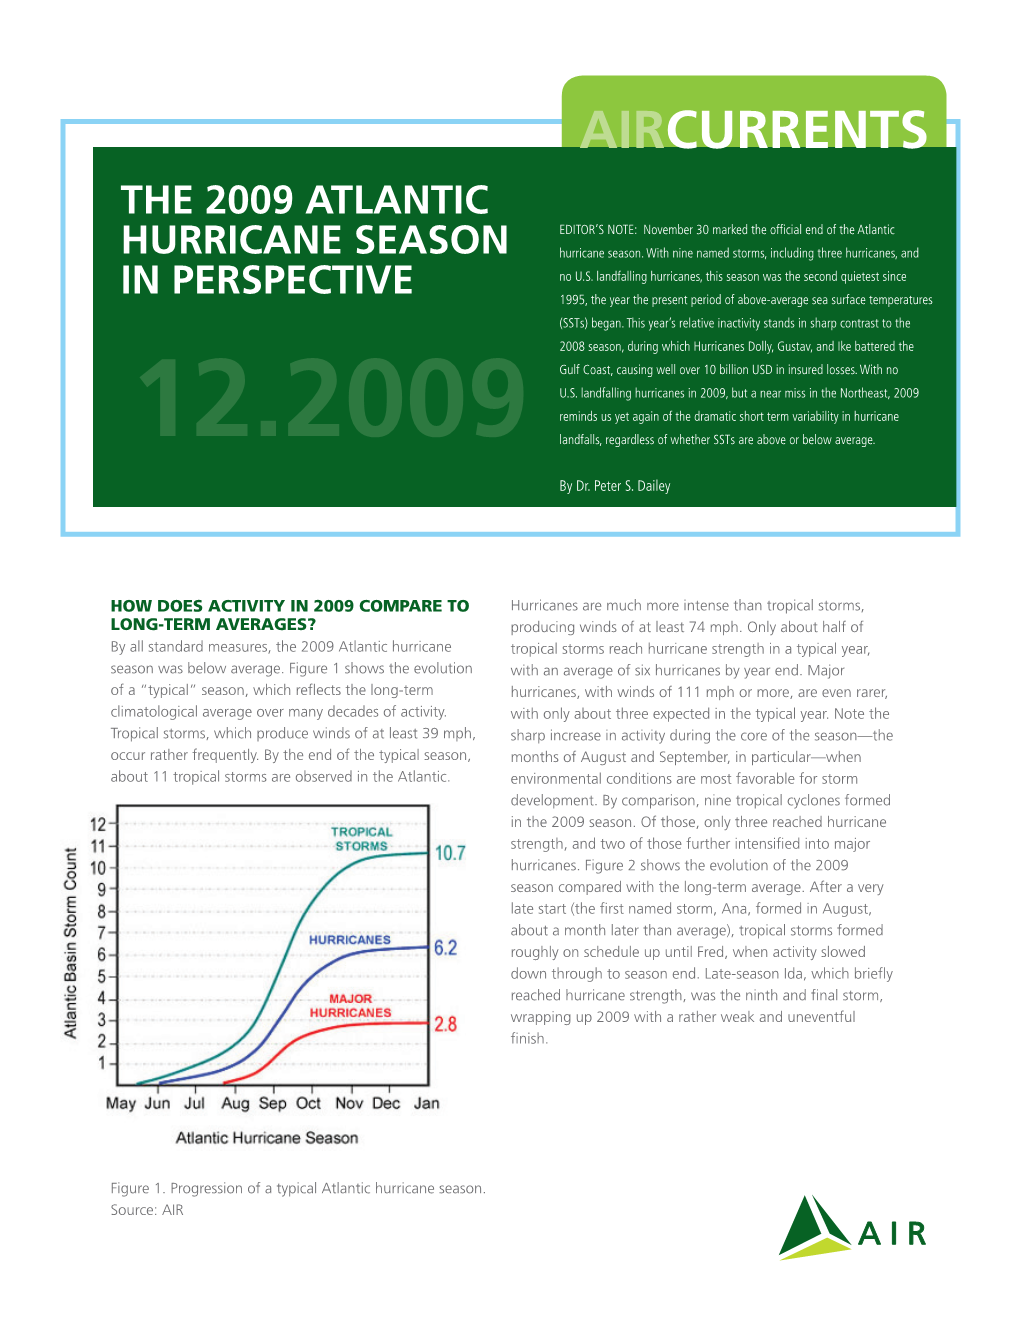 The 2009 Atlantic Hurricane Season in Perspective by Dr